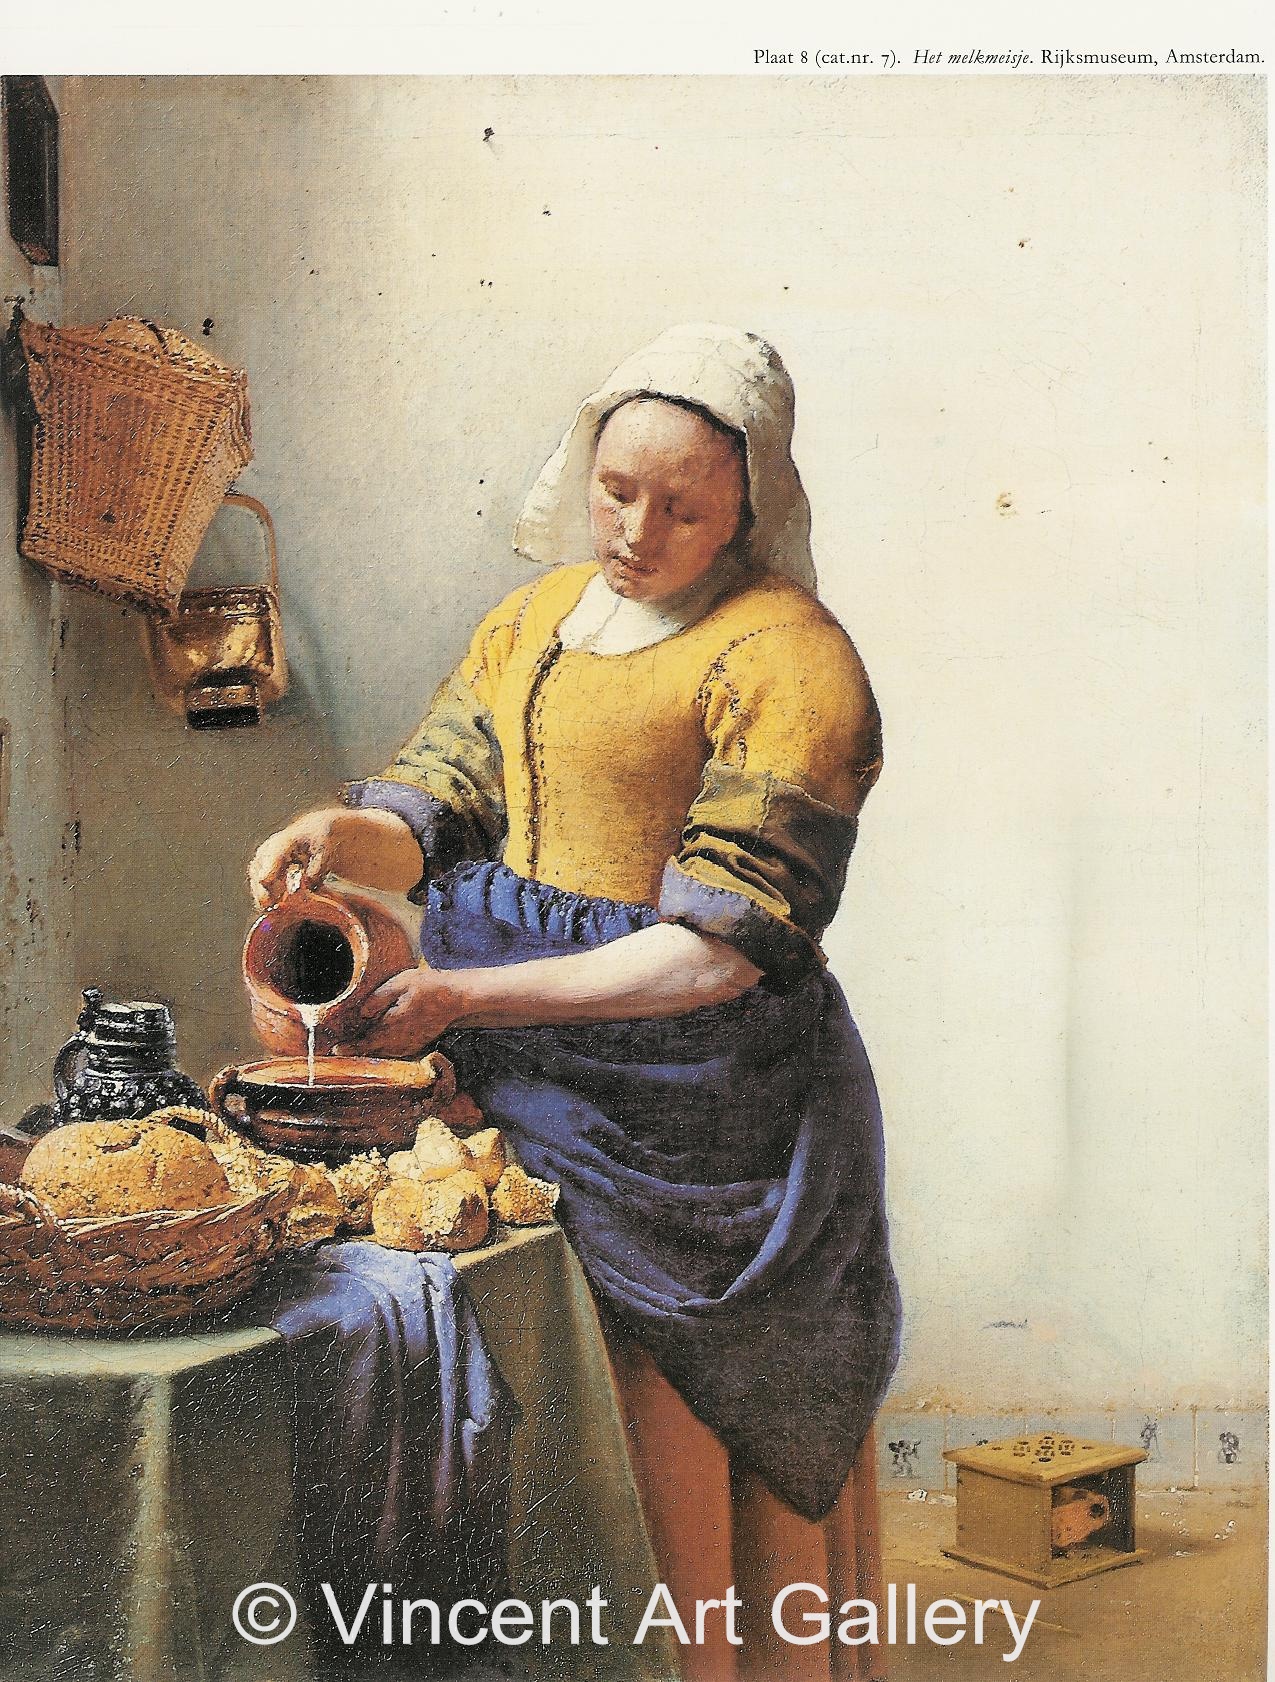 A118, VERMEER, The Milkmaid, - detail of the wall -